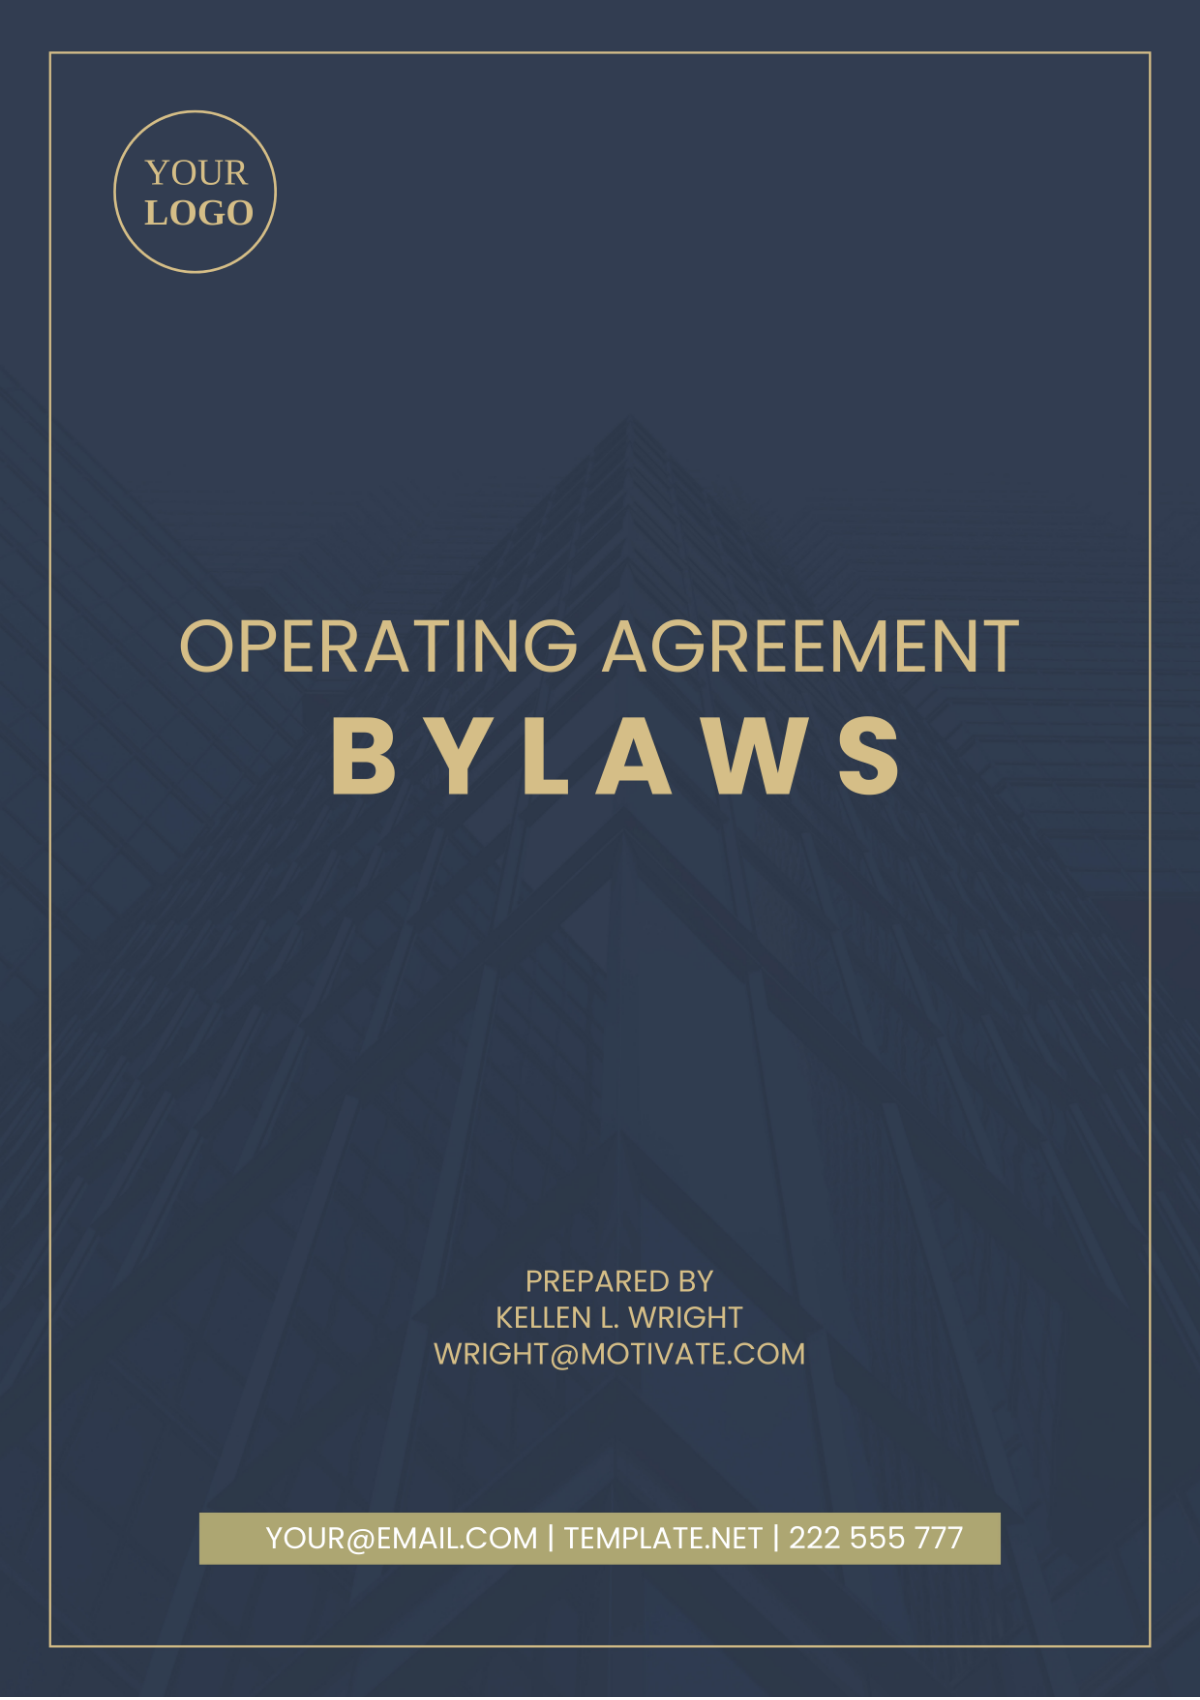 Bylaws Operating Agreement Template